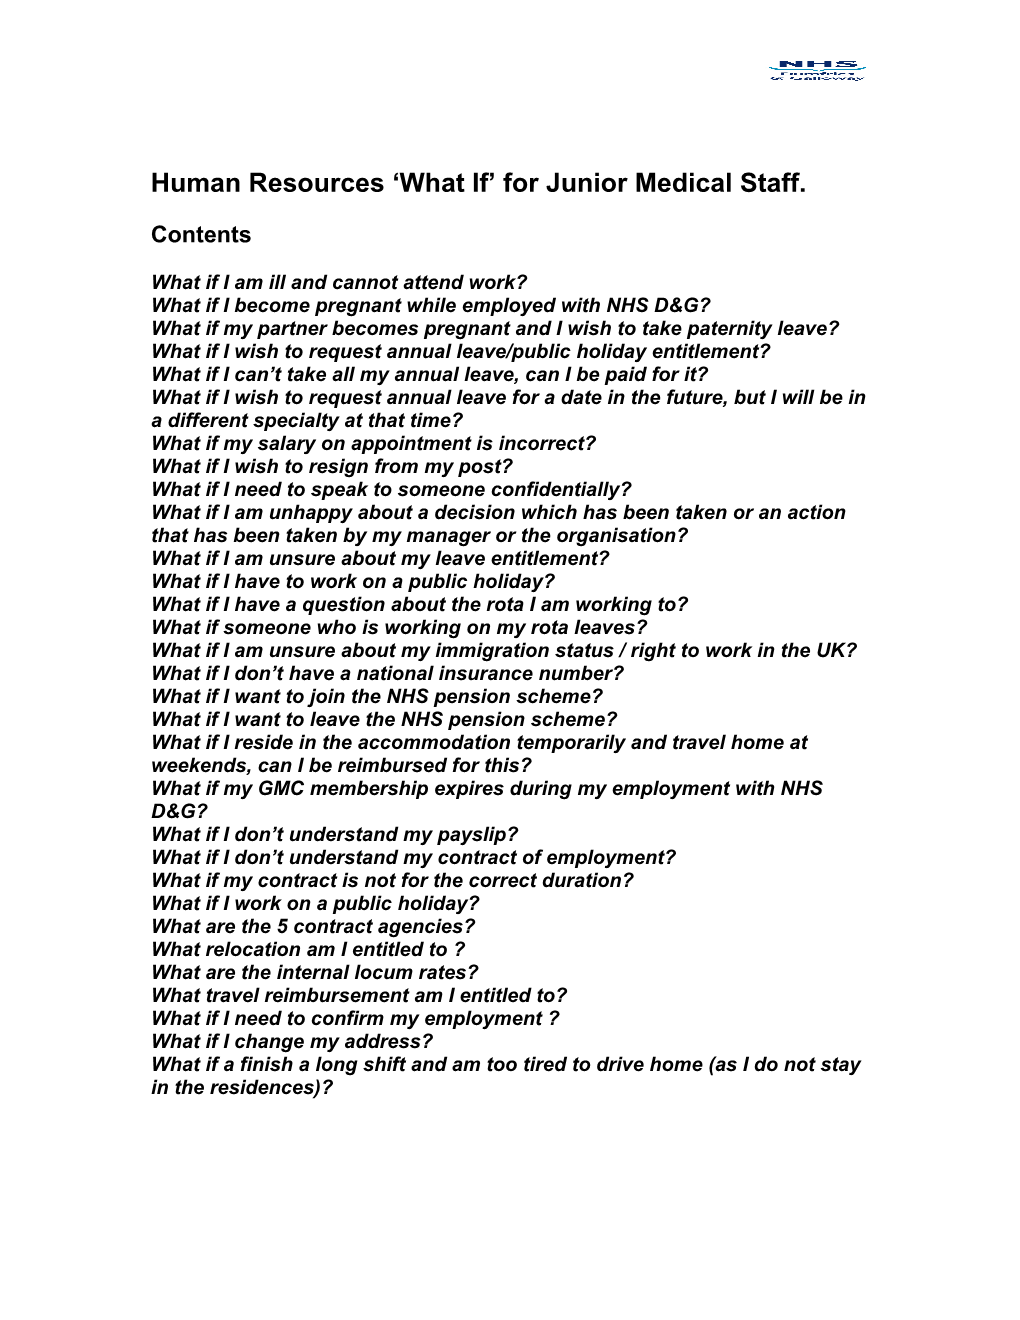 HR What If for Junior Medical Staff